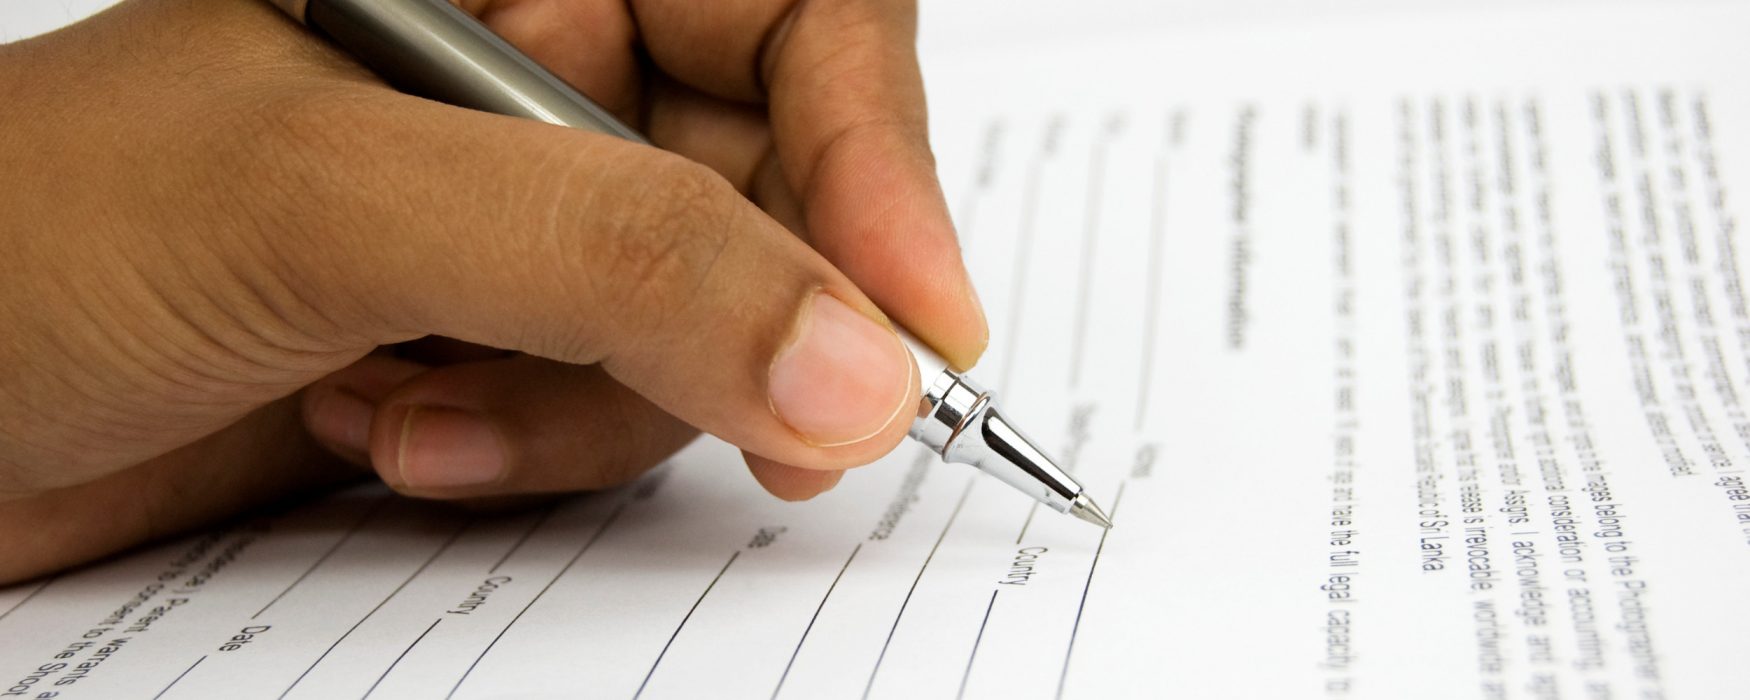 Hand holding a pen, filling out a form